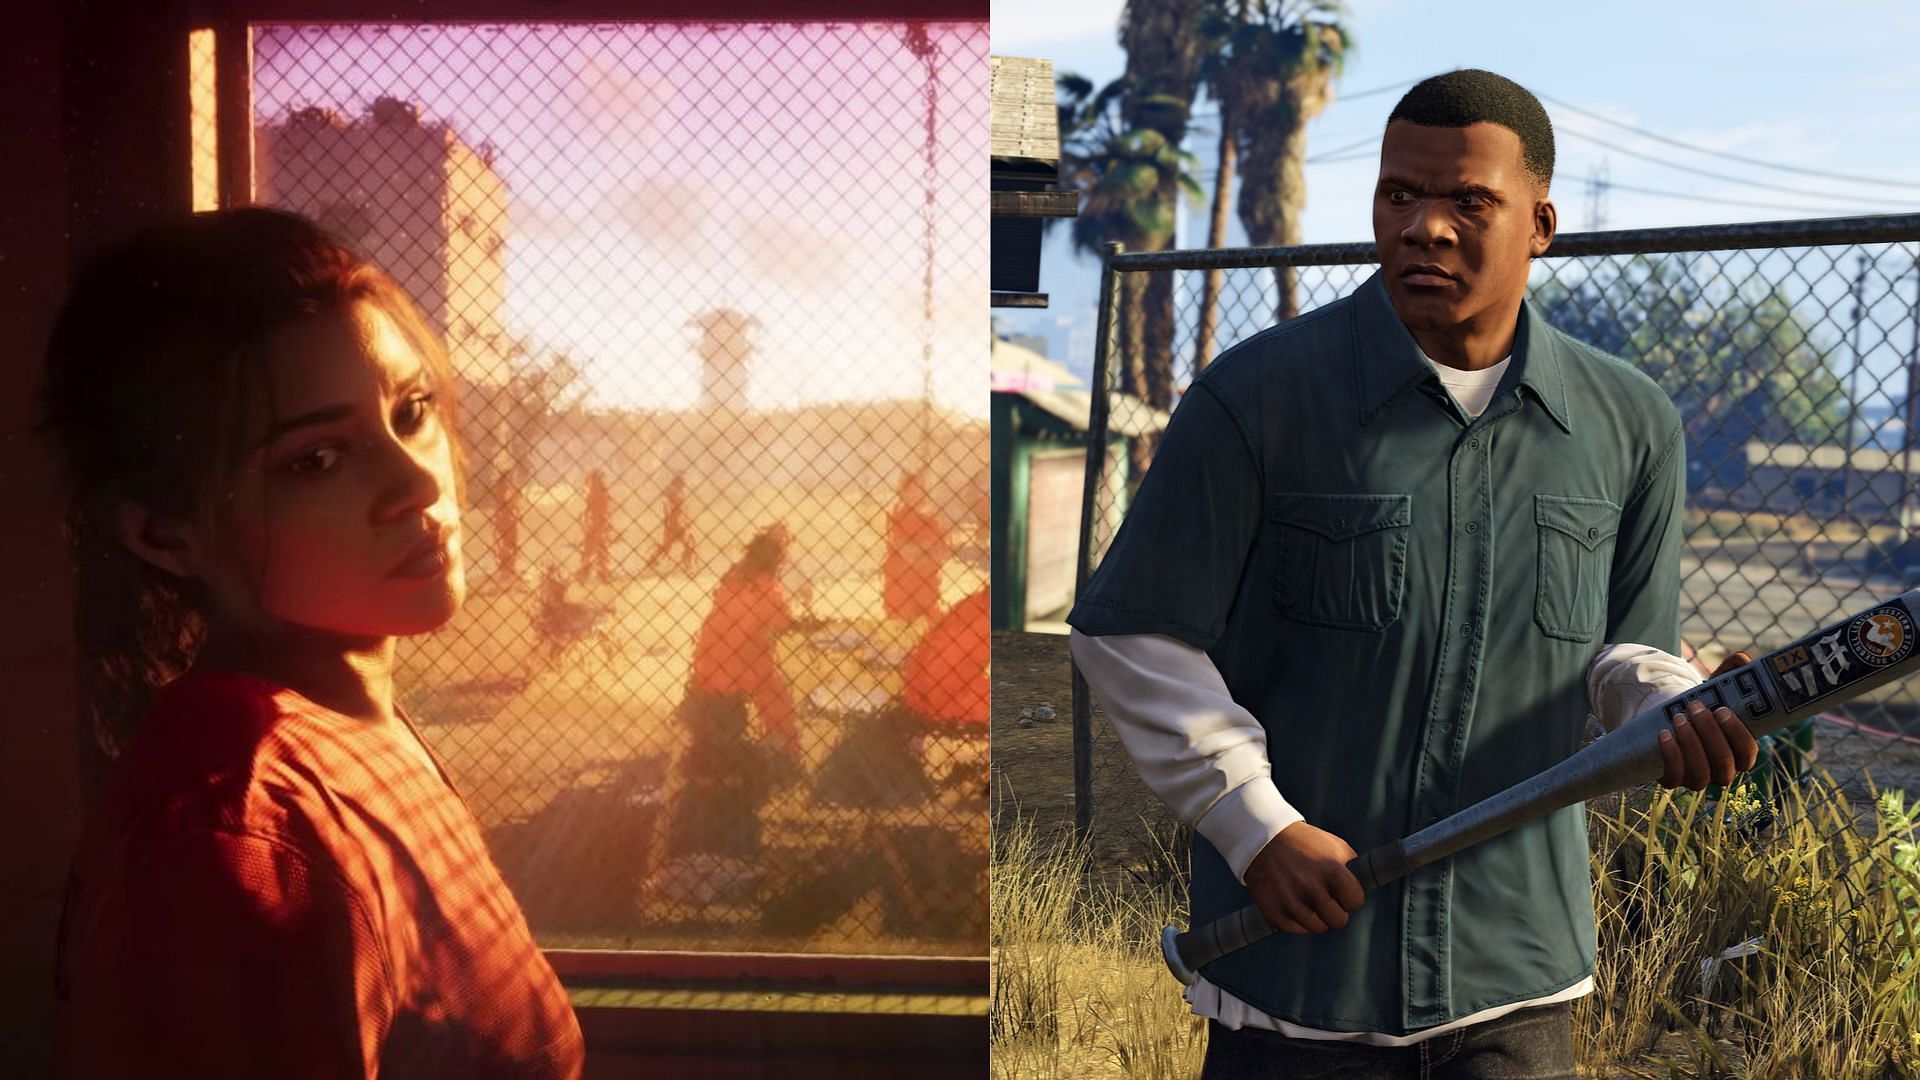 The light reflects and interacts with the characters better in the trailer (Image via Rockstar Games)